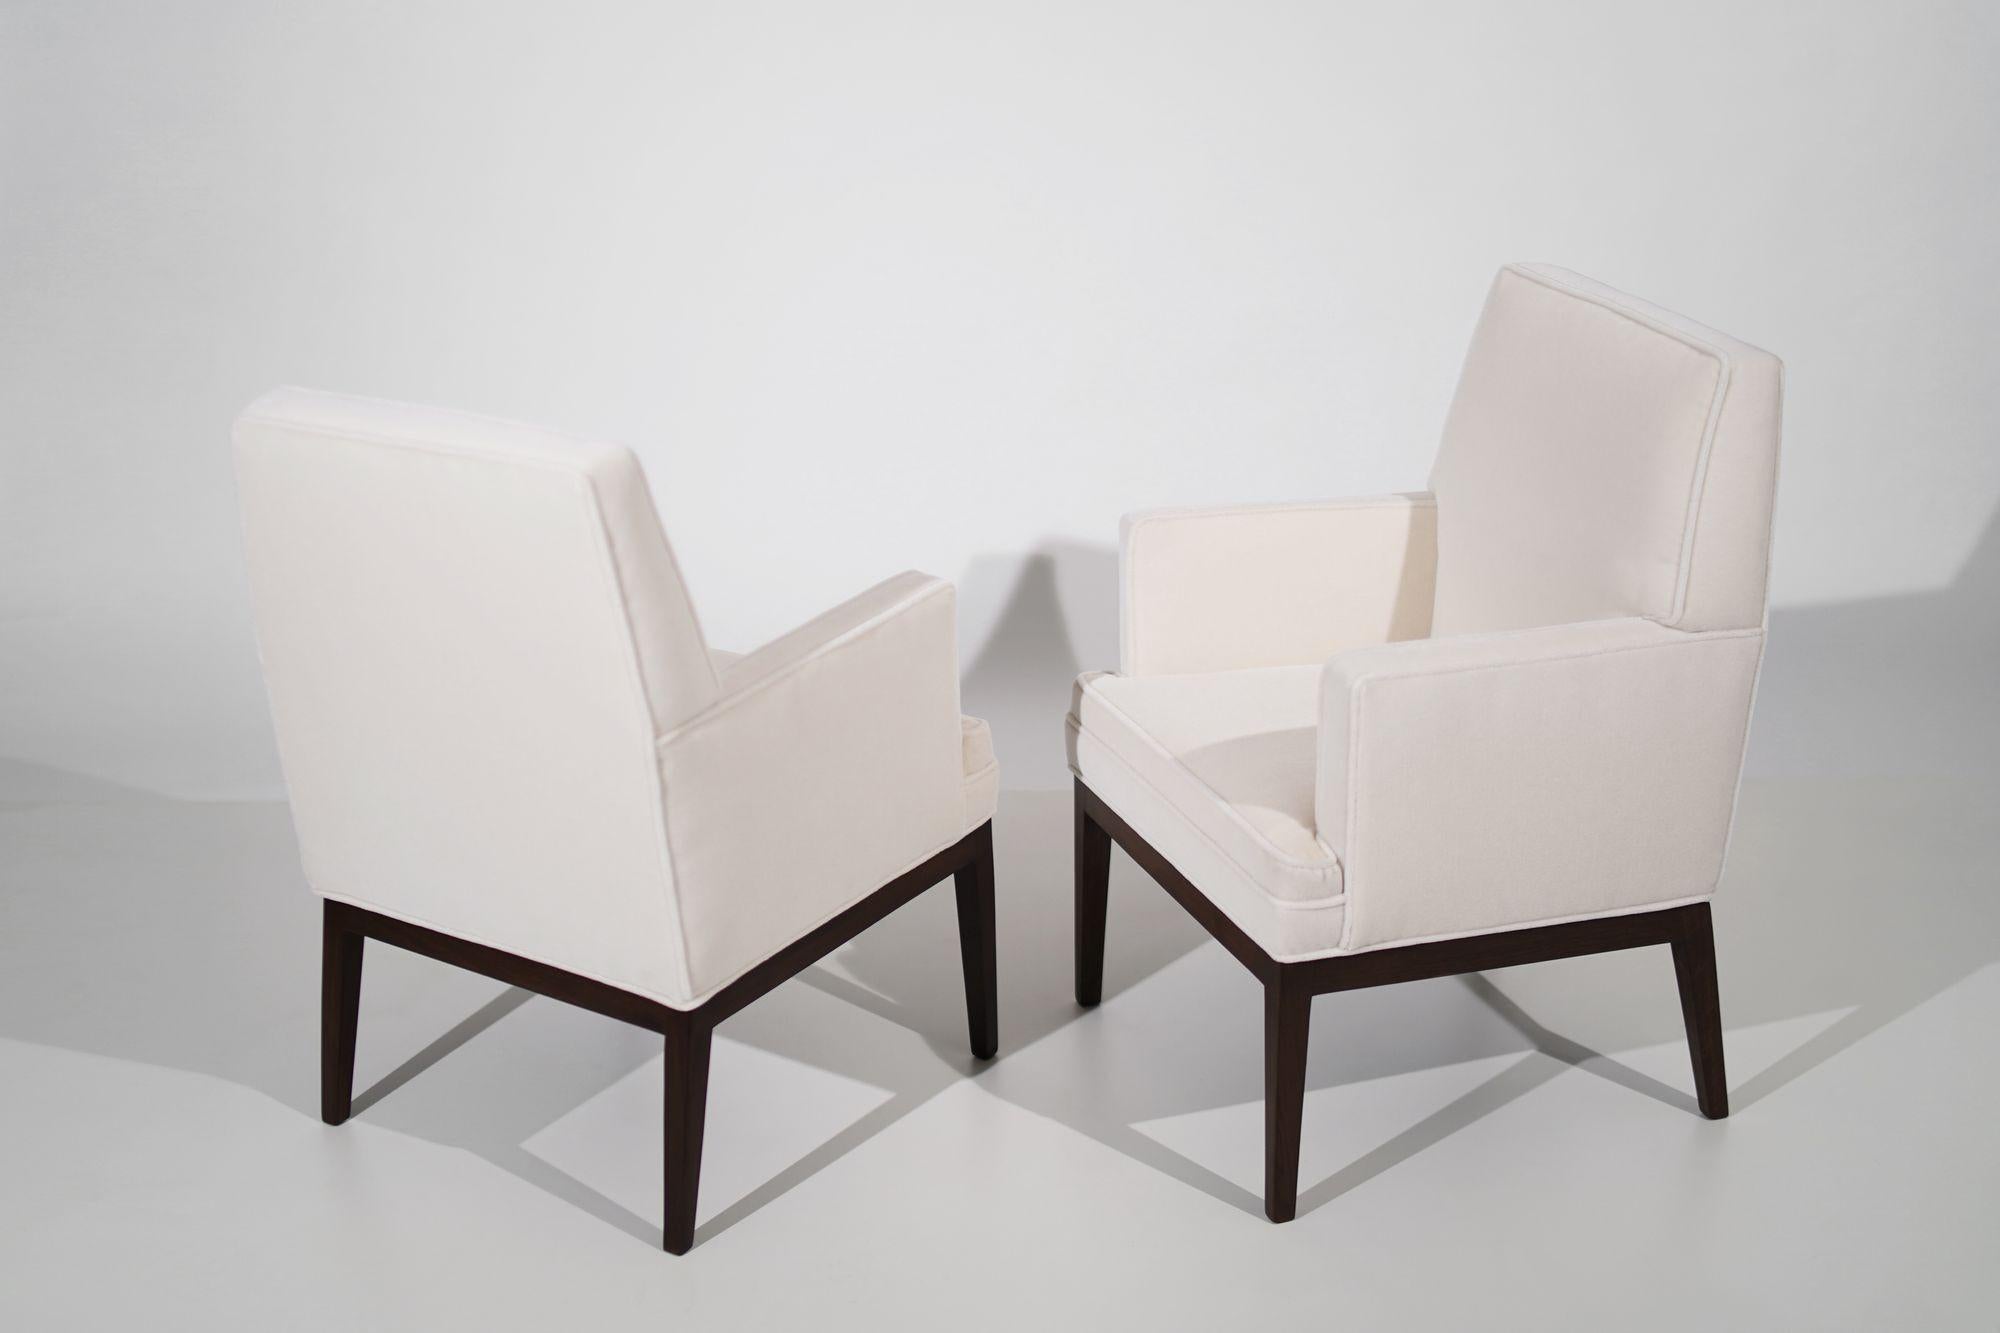 American Set of Club Chairs in Mohair by Jens Risom, C. 1960's For Sale